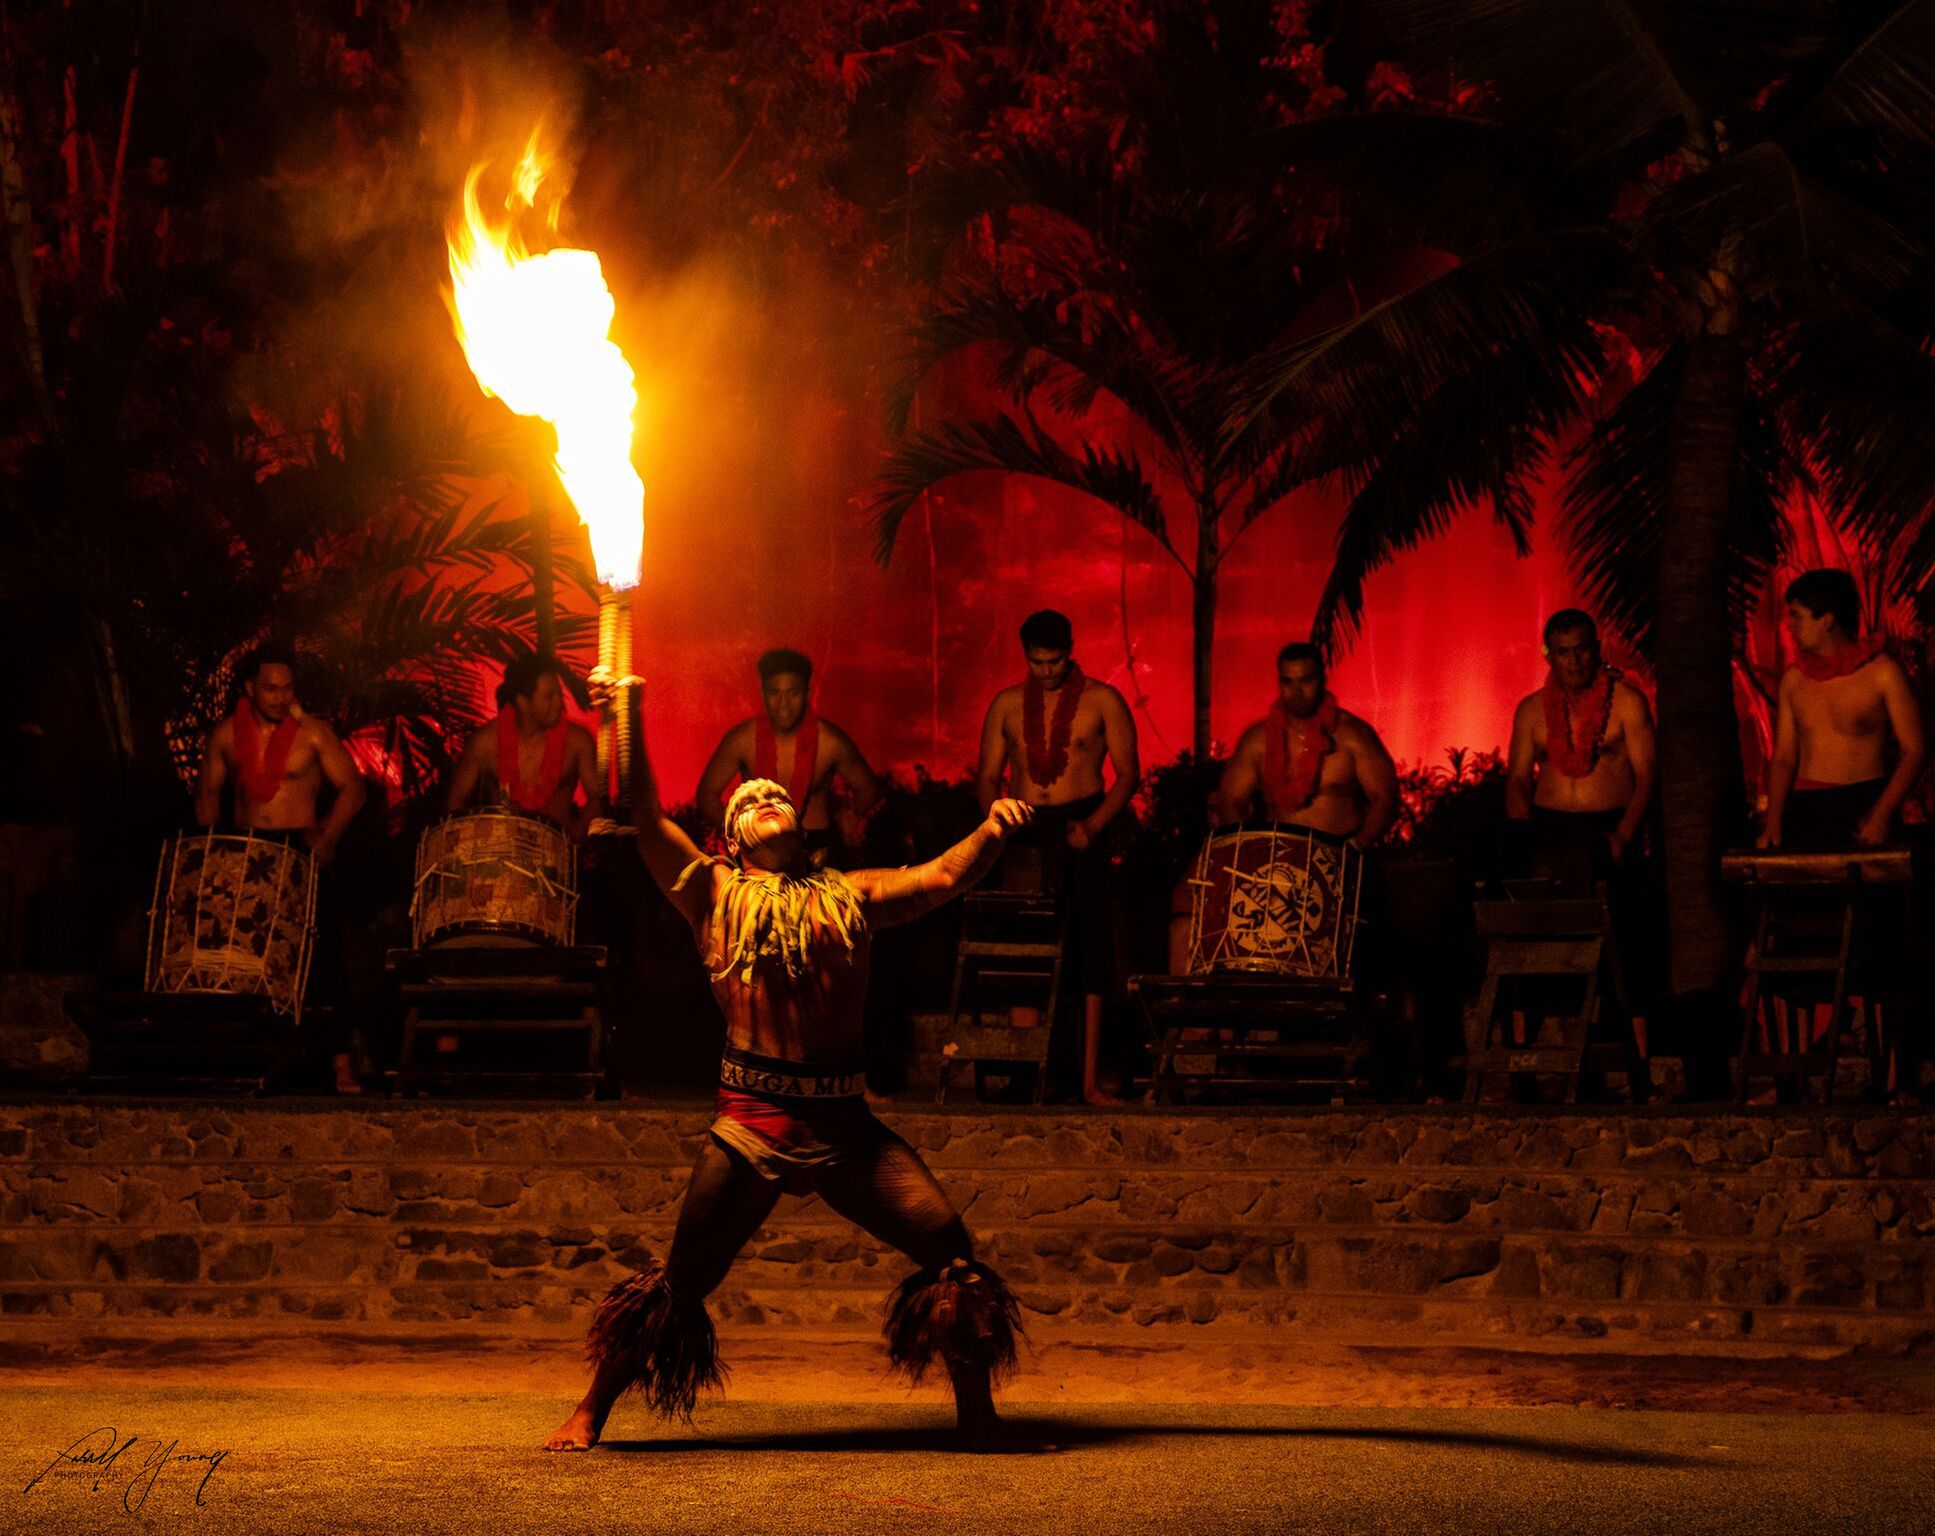 photograph of competitor at the Polynesian fireknife dancer performing at the 27th Annual Fireknife Co with drummers playing in the backgroun.petition